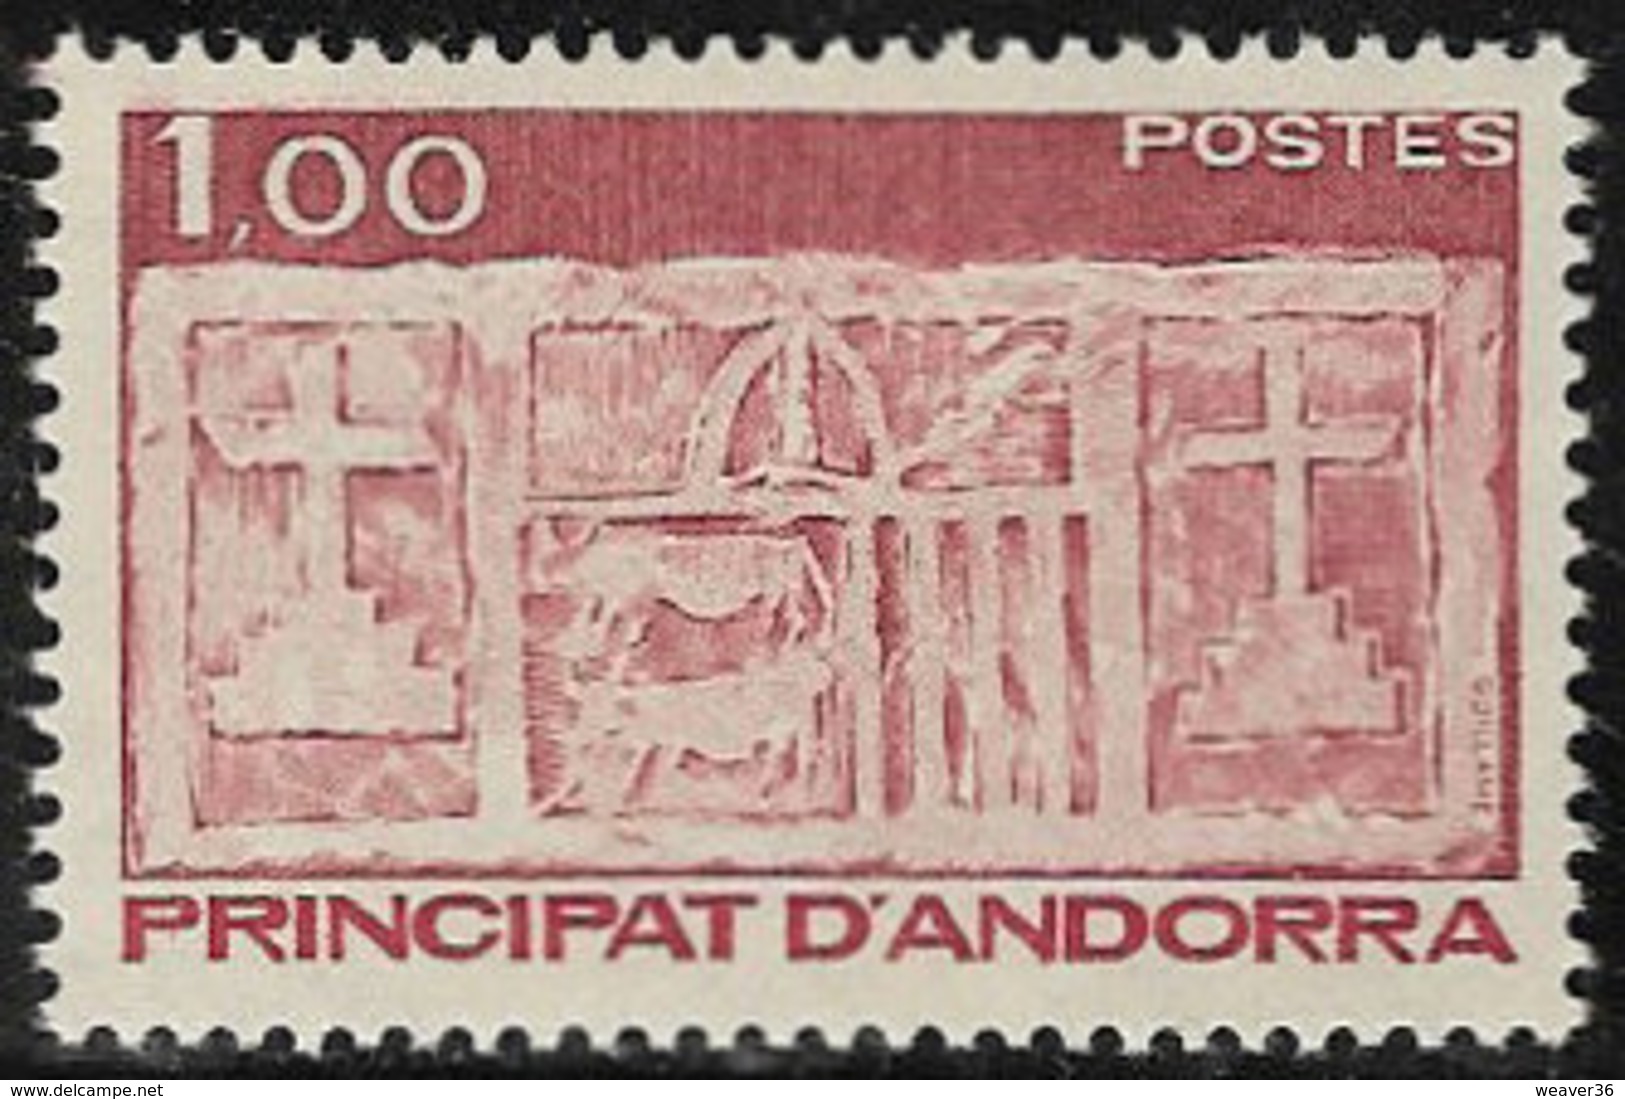 Andorra (French POs) SG F341 1983 Definitive 1f Mounted Mint [40/32606/7D] - Unused Stamps